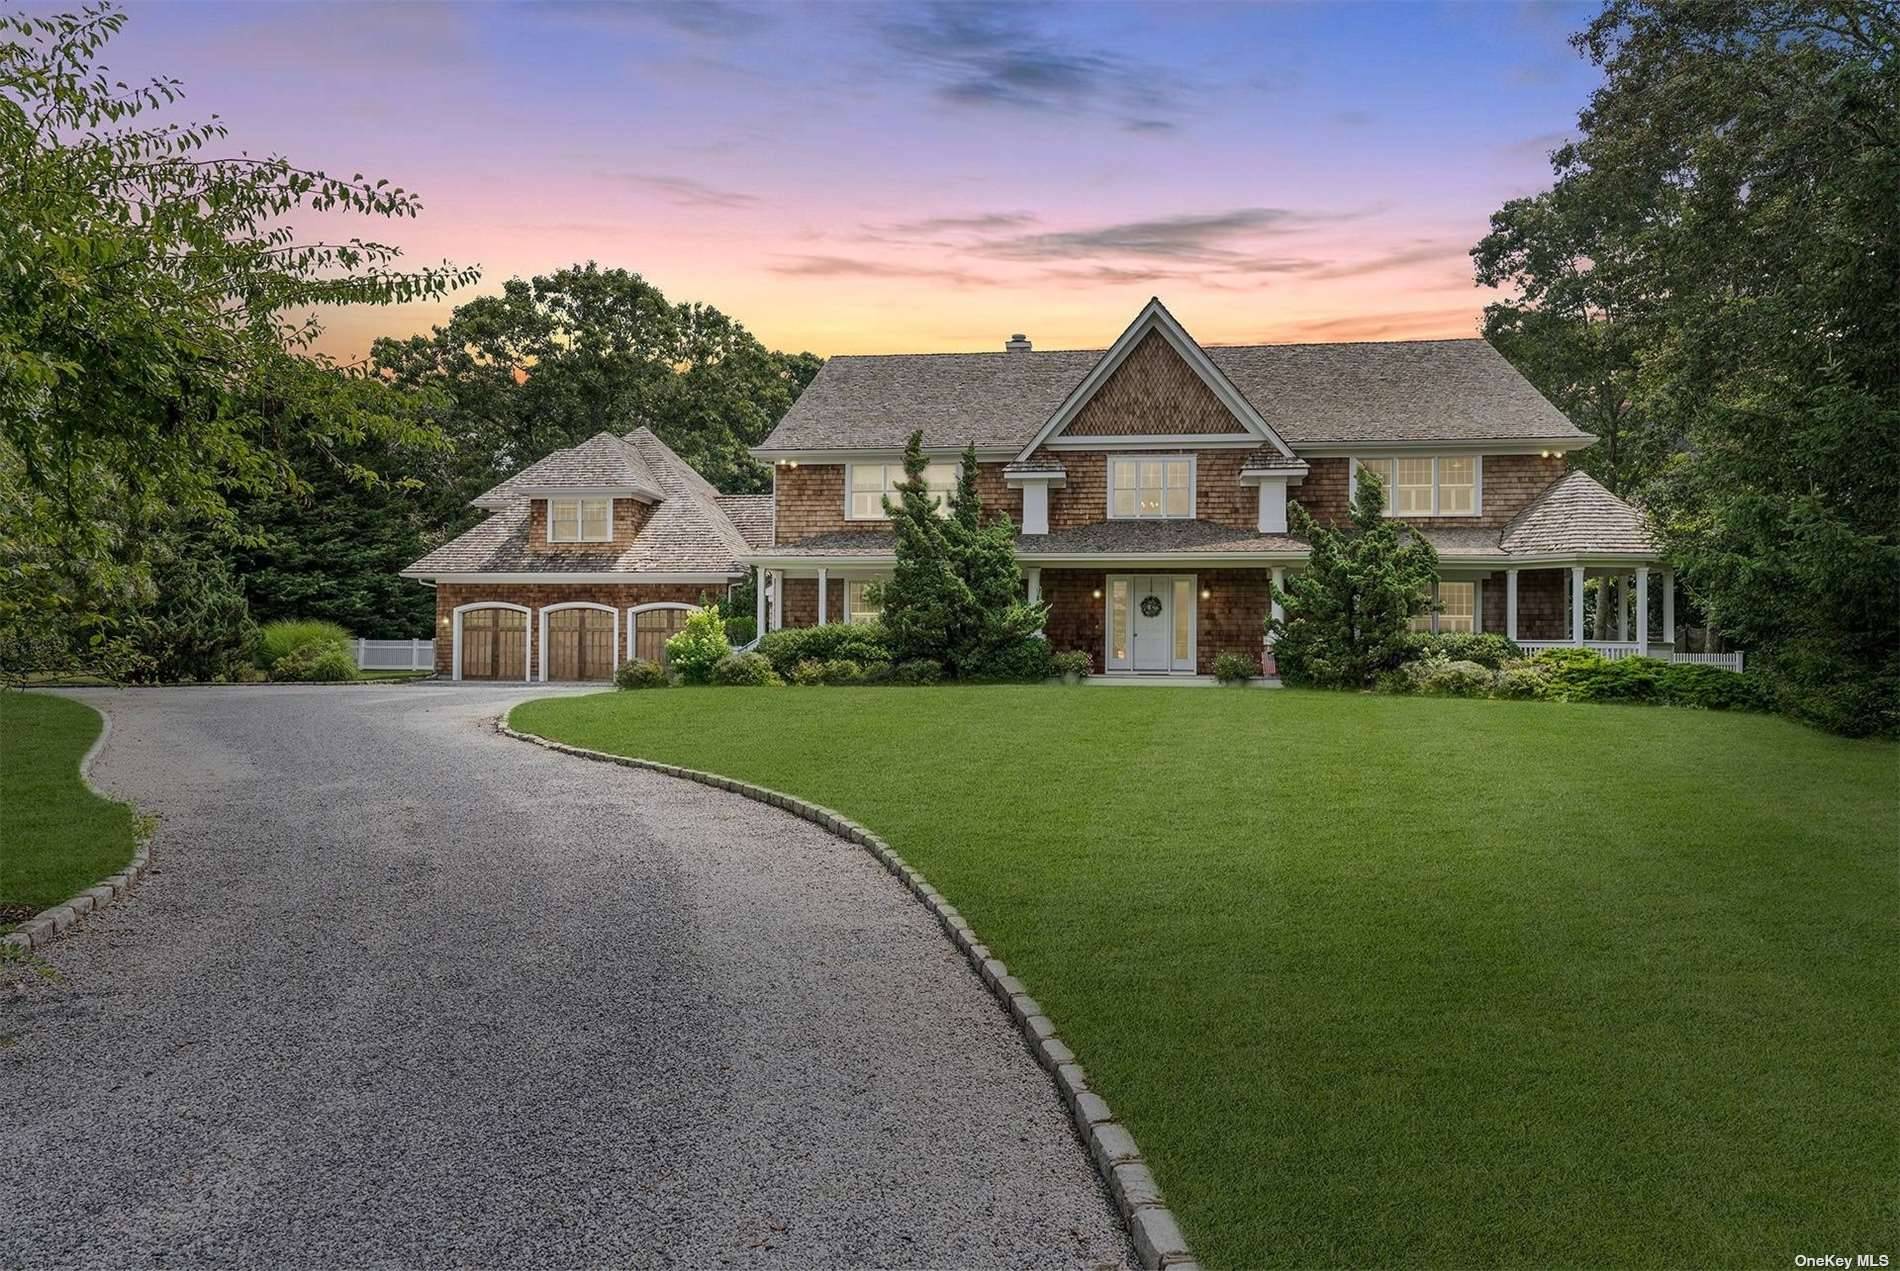 Located in the heart of Quogue South, this stunning generational estate sits on 1.